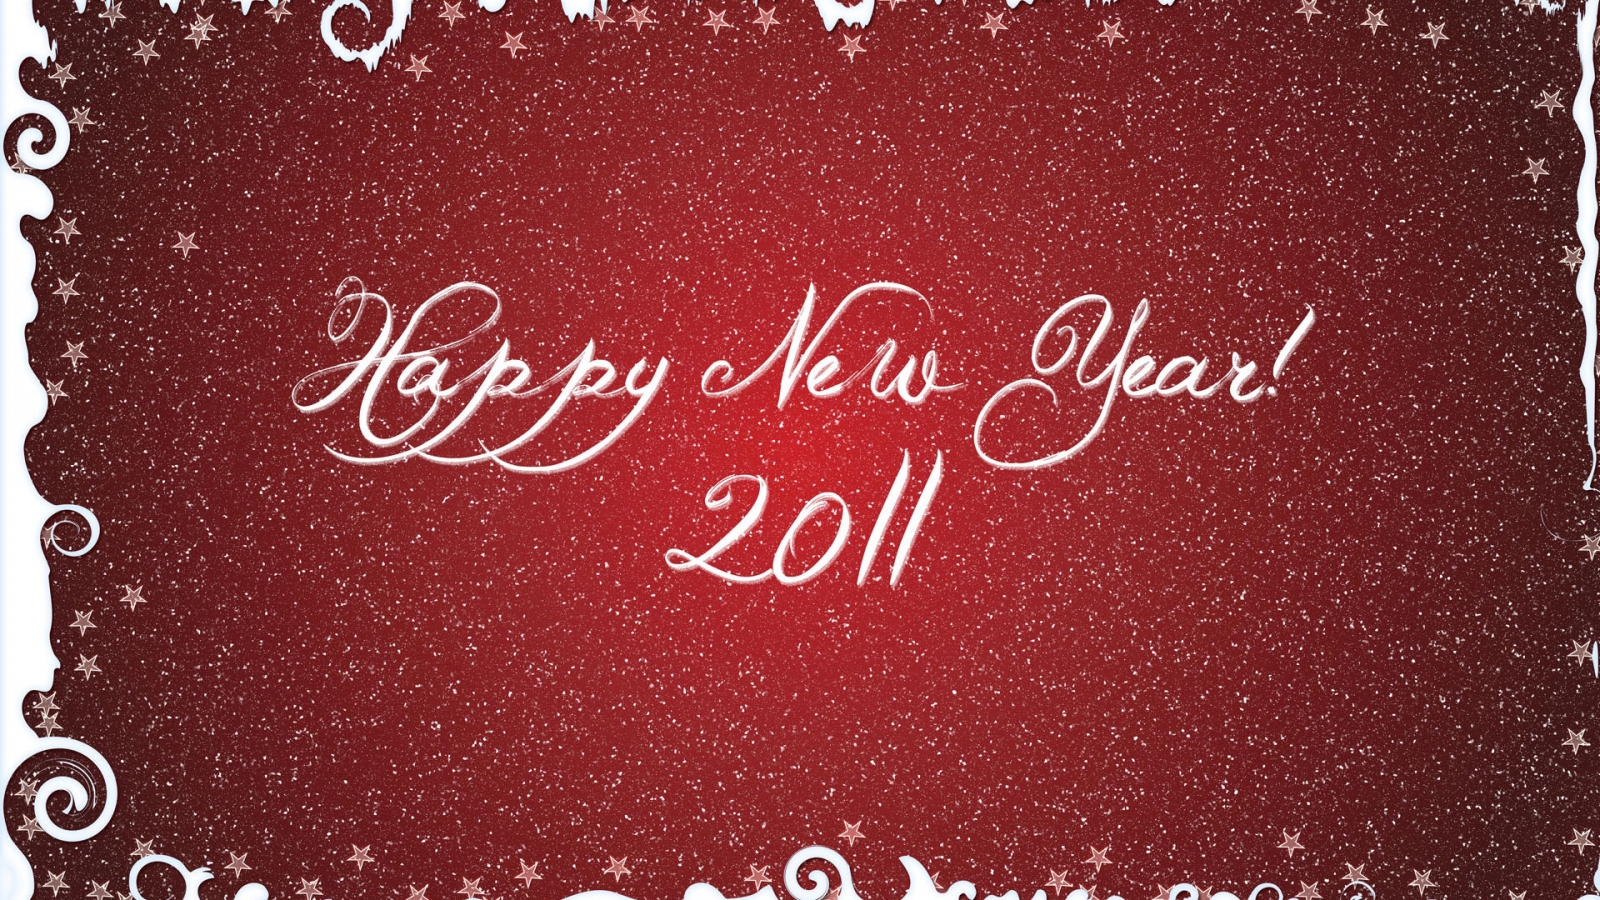 Happy New Year 2011 for 1600 x 900 HDTV resolution